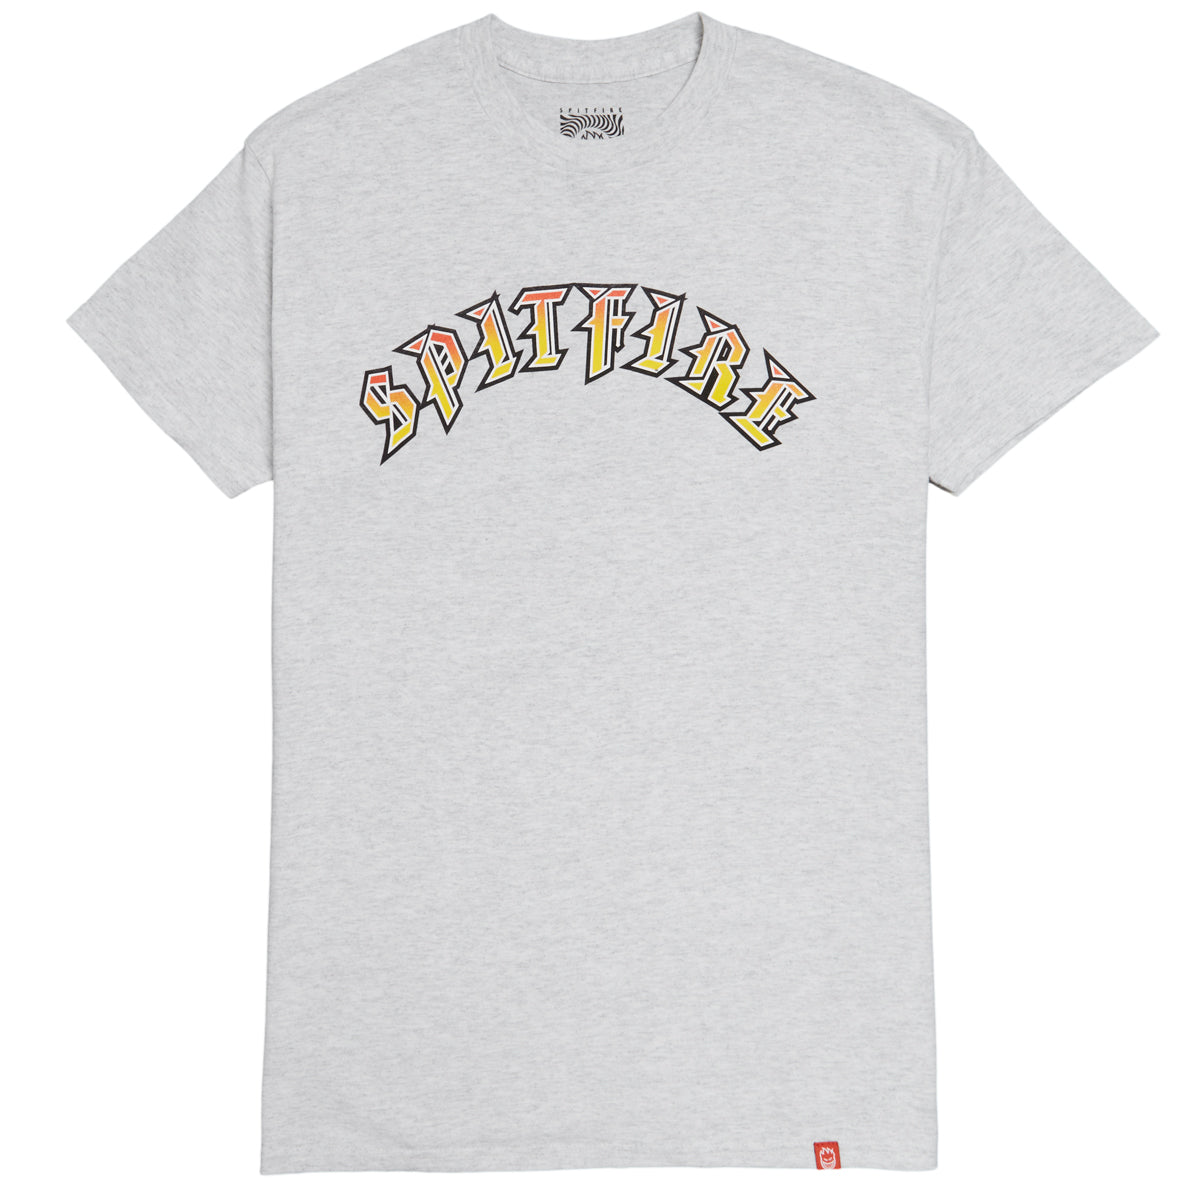 Spitfire Old E Fade Fill T-Shirt - Ash/Red/Gold Fade image 1